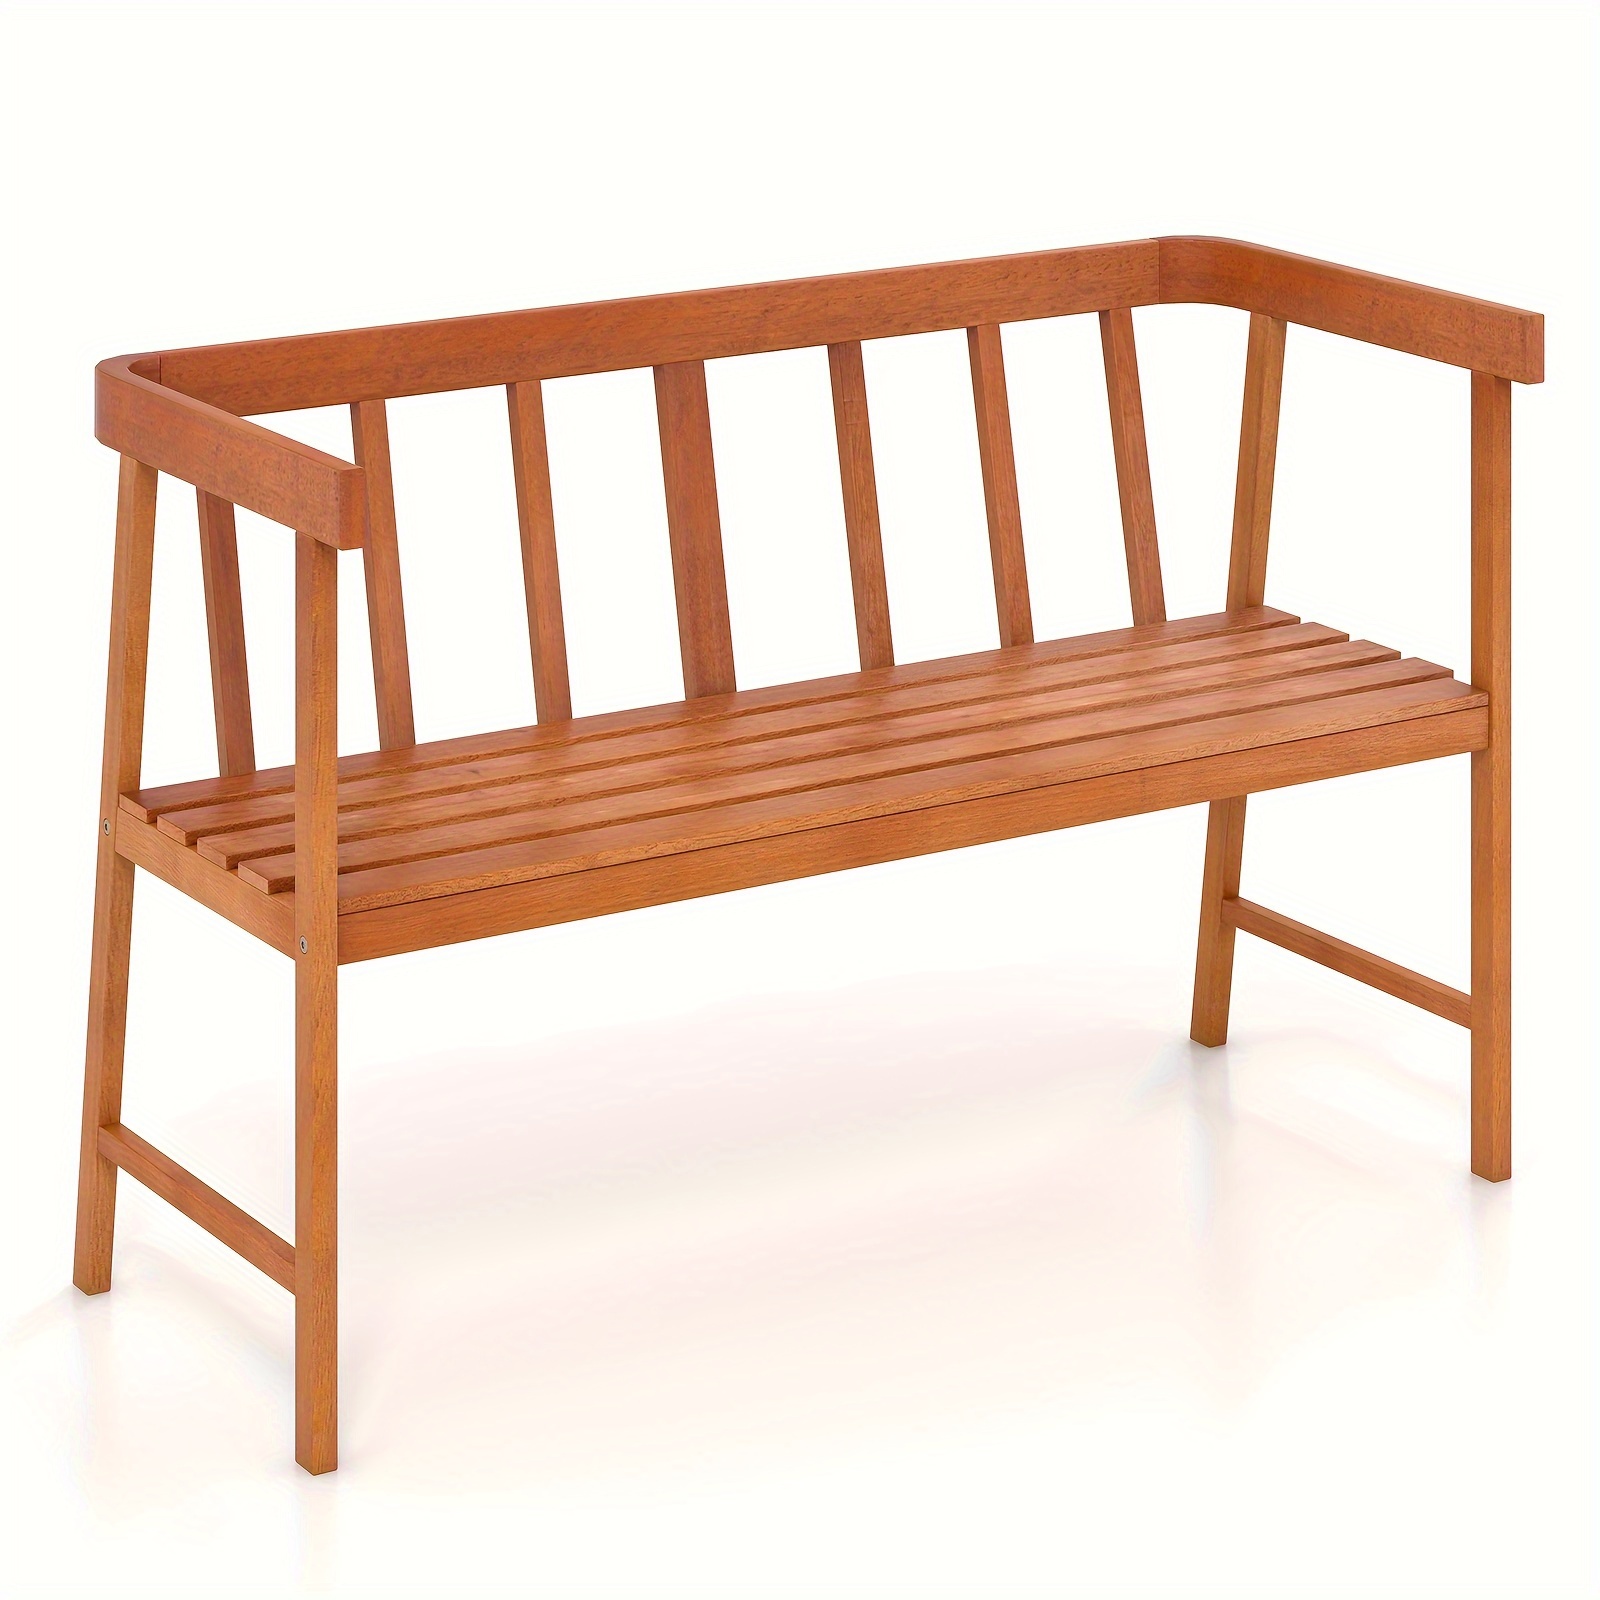 

1pc 2-person Patio Bench, Natural Acacia Wood, Slatted Seat With Backrest, 800 Lbs Capacity, 43"x18"x28", Outdoor Furniture